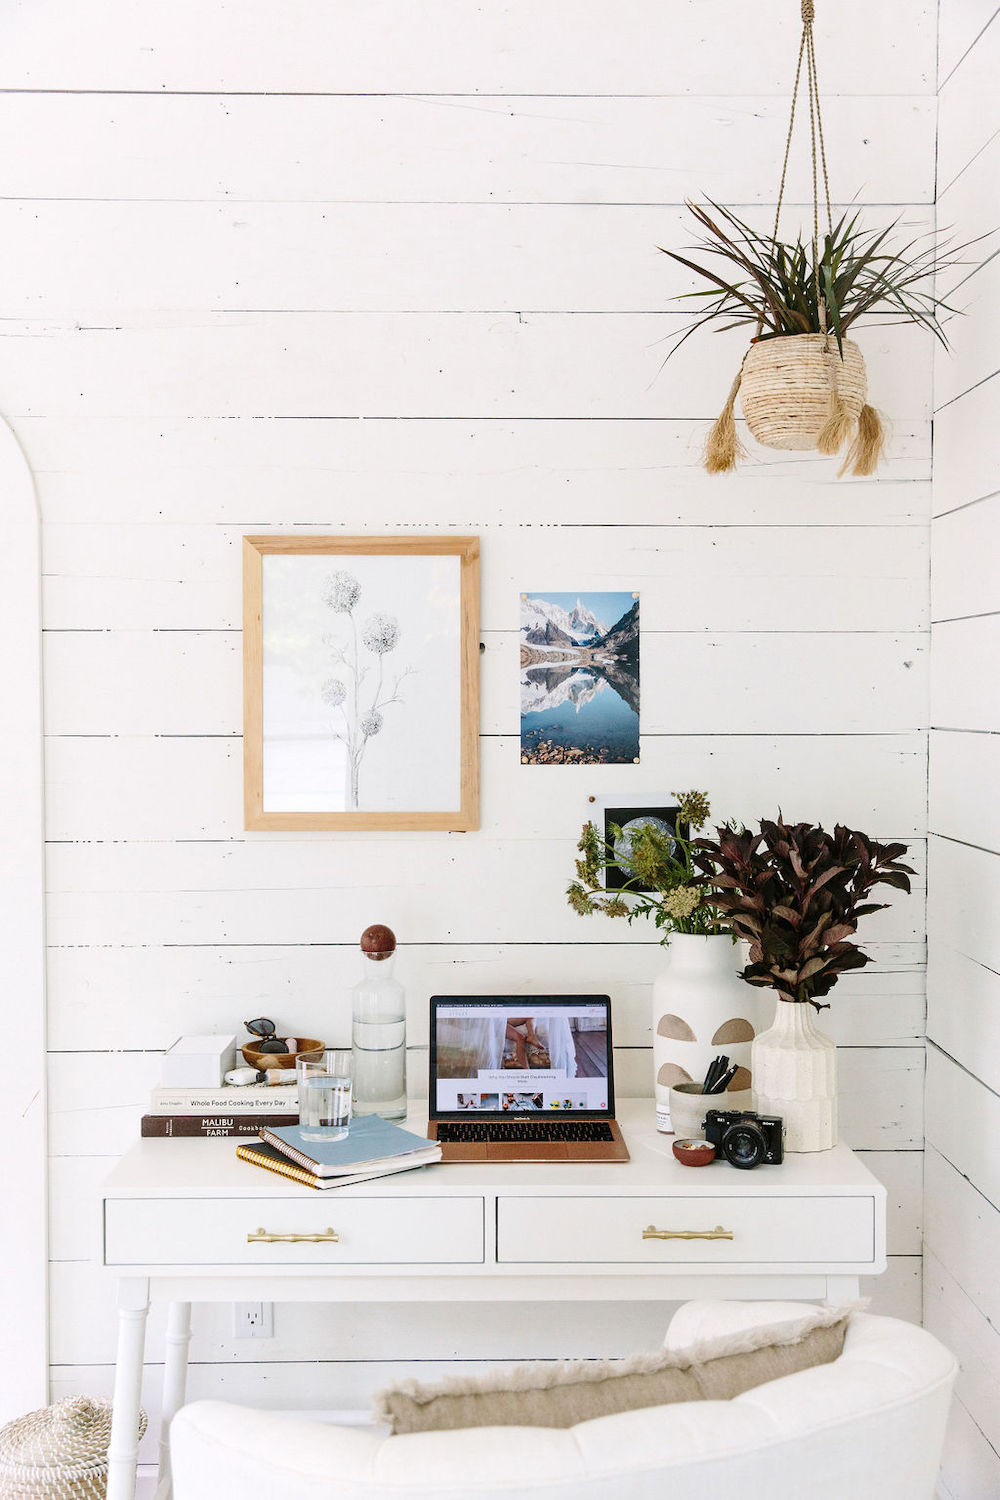 Target Boho Home Decor Finds - A Styled Life by Nayla Smith